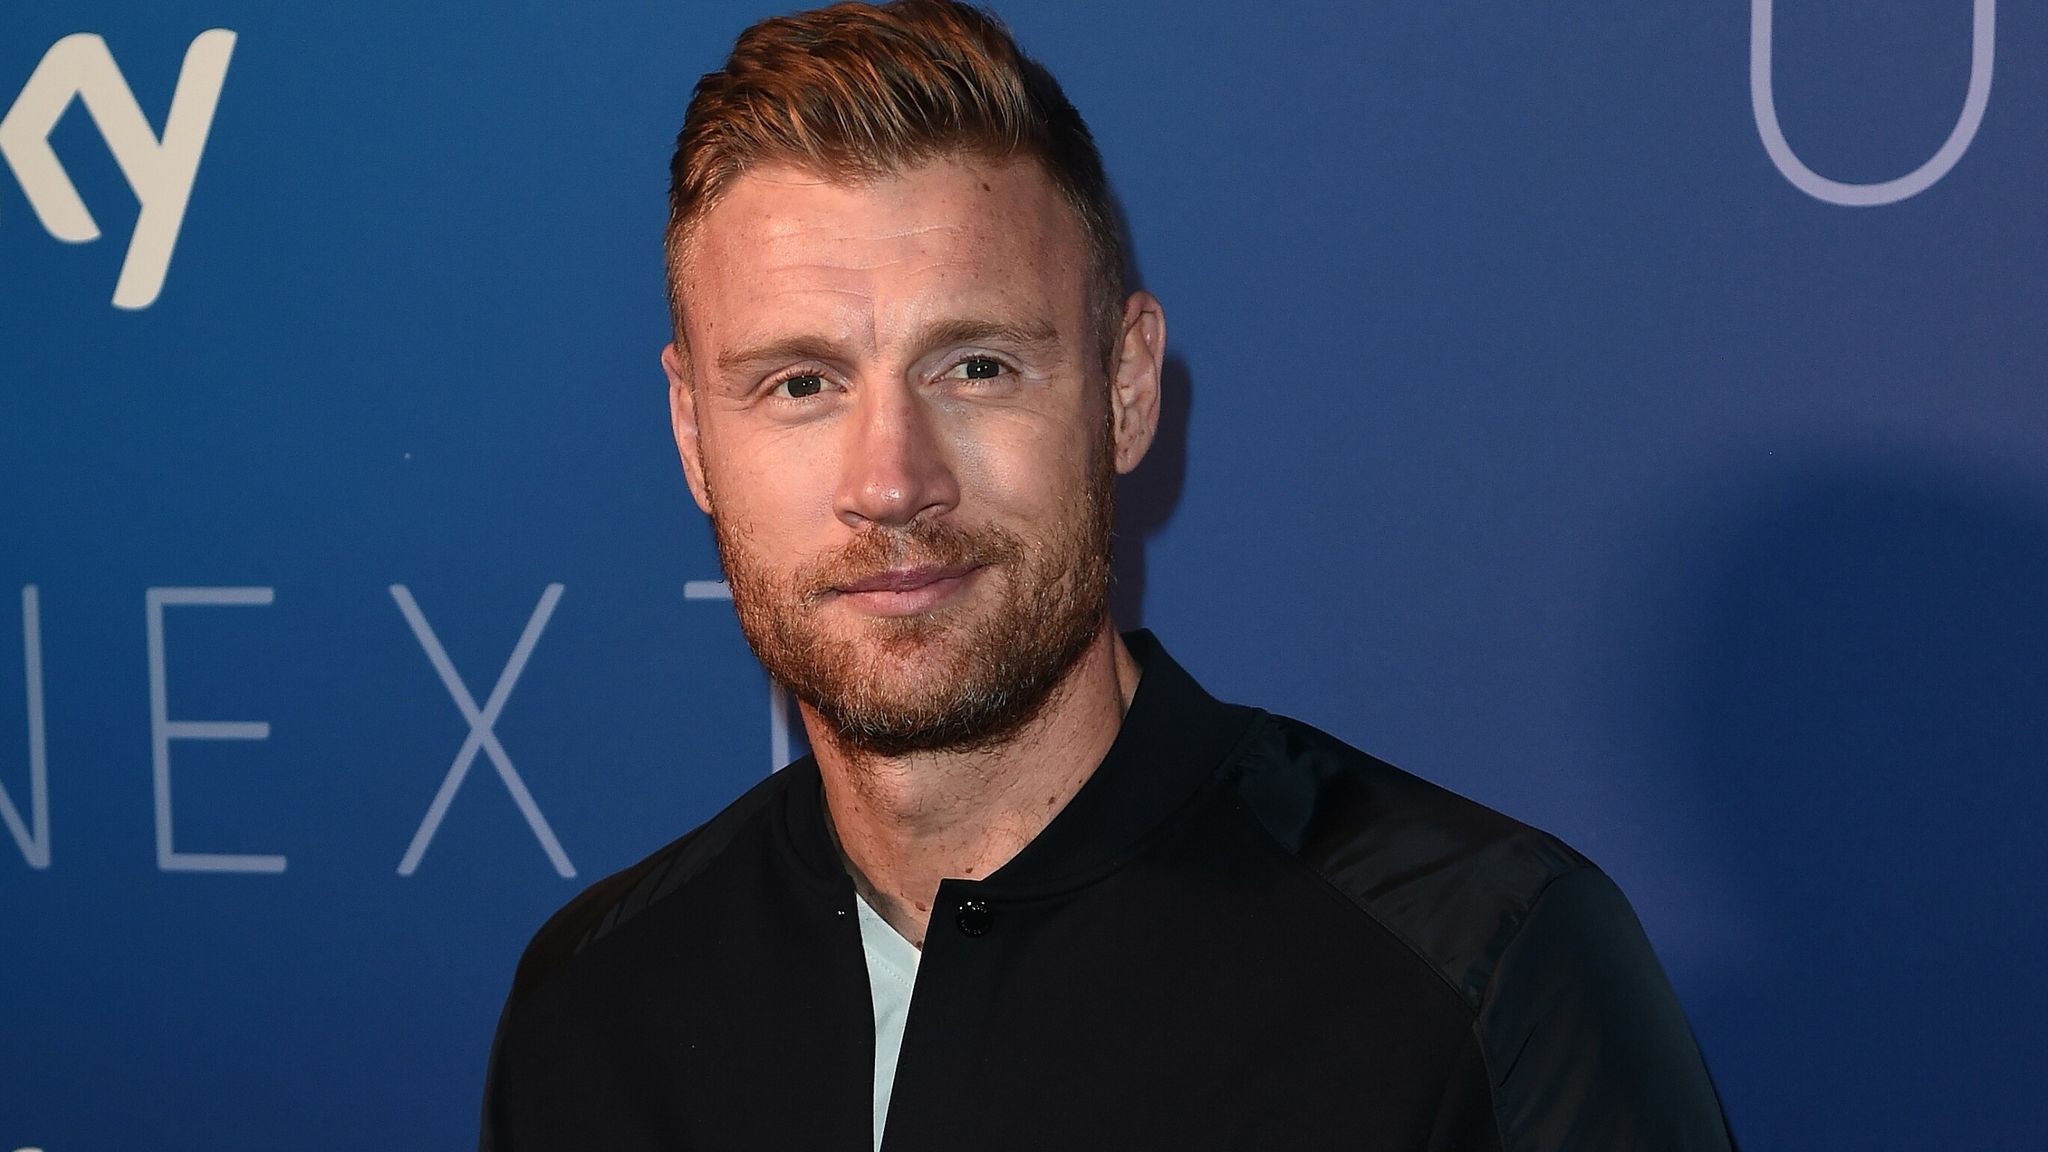 BBC axes Top Gear series and apologises to Andrew Flintoff after crash investigation | Ents & Arts News | Sky News